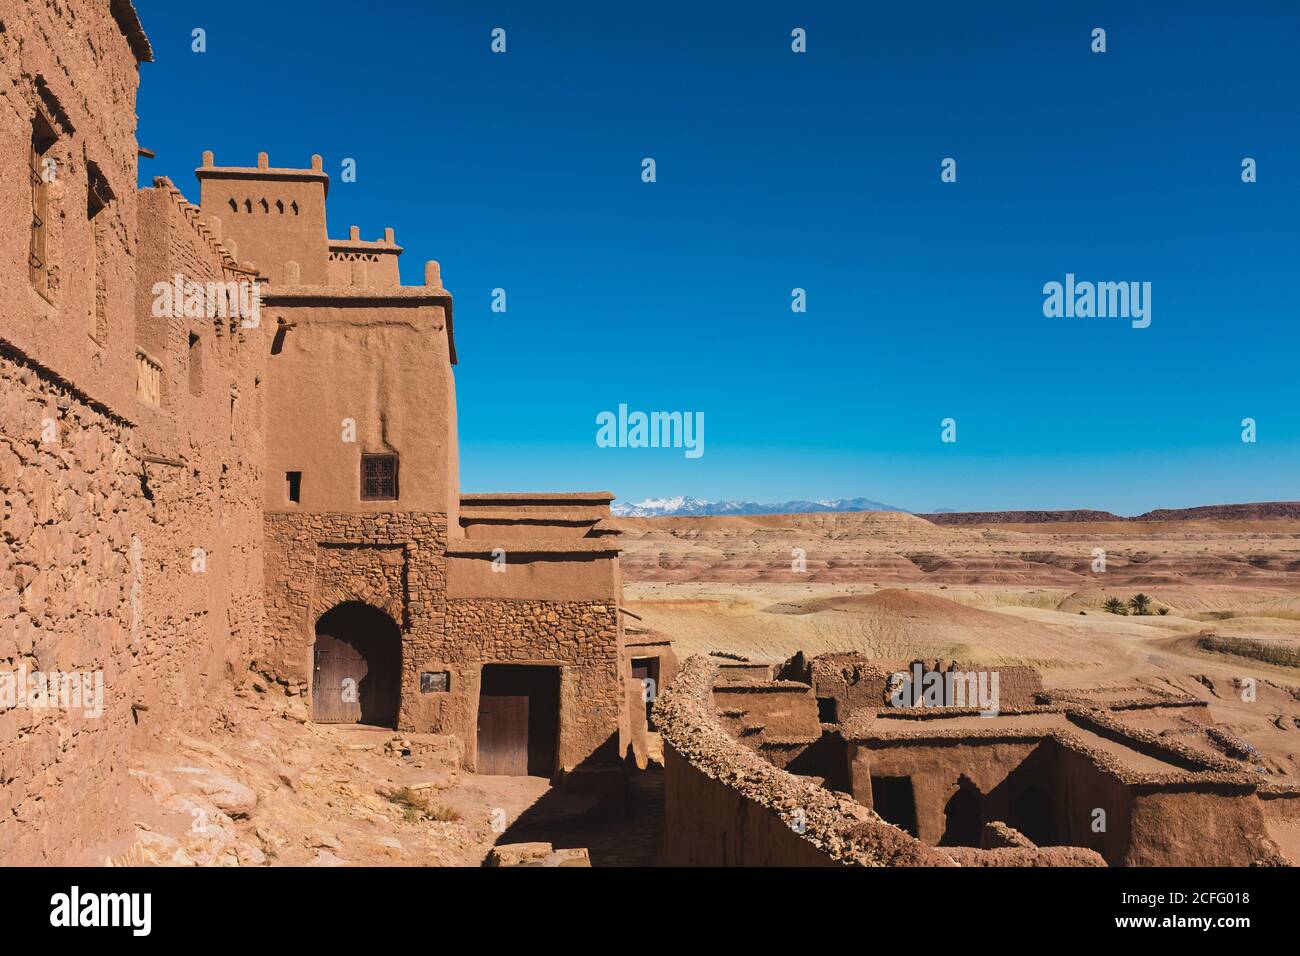 Magnificent scenery of facade of ancient clay buildings and walls in Ait Ben Haddou on sunny day Stock Photo